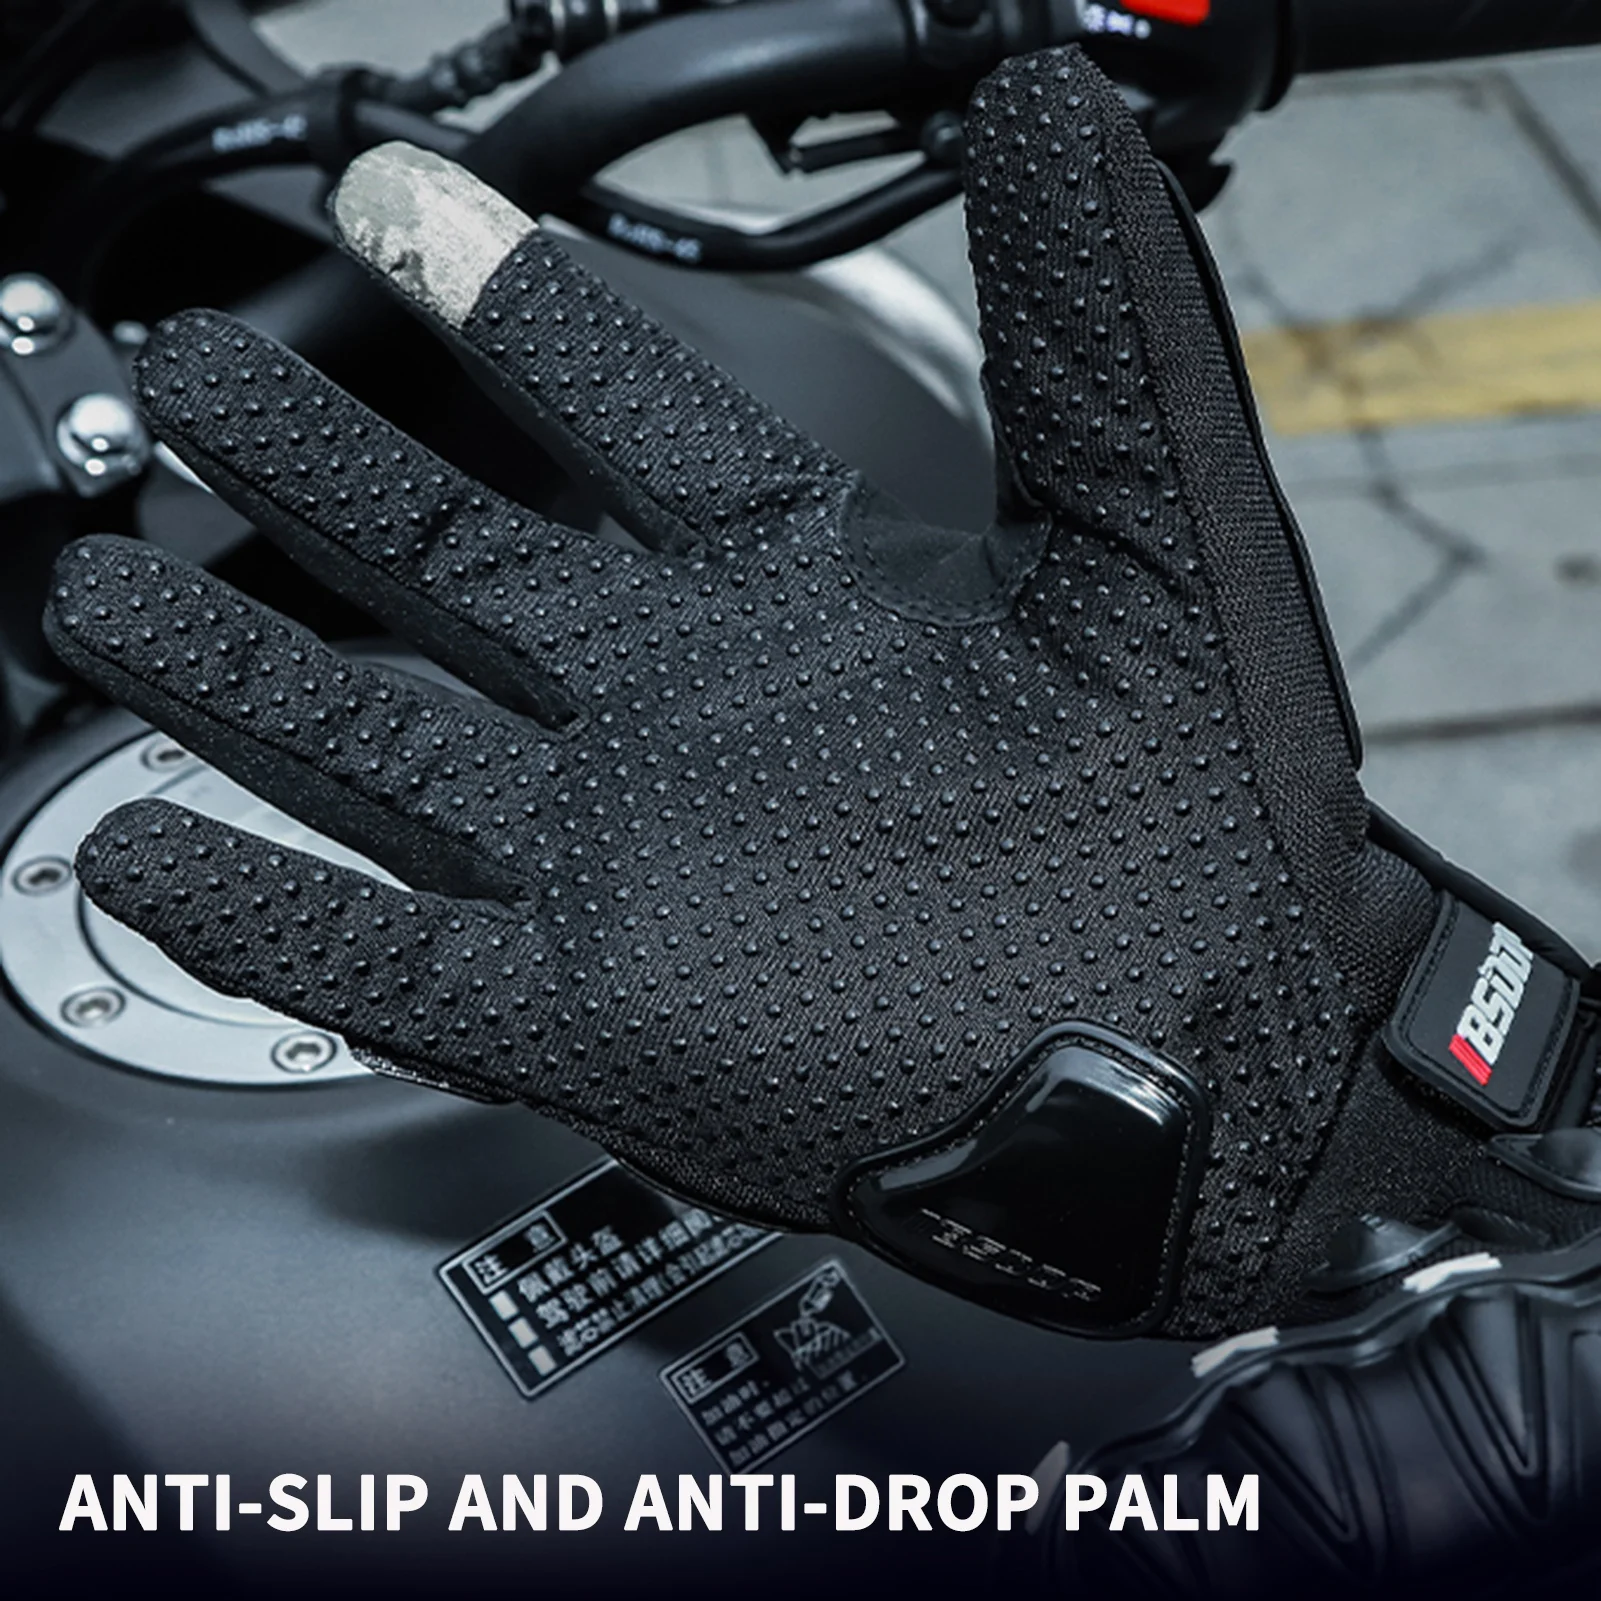 BSDDP Motorcycle Riding Gloves Rider Anti-slip Anti-drop Universal Outdoor Breathable Touch Screen Gloves Motocross Protector